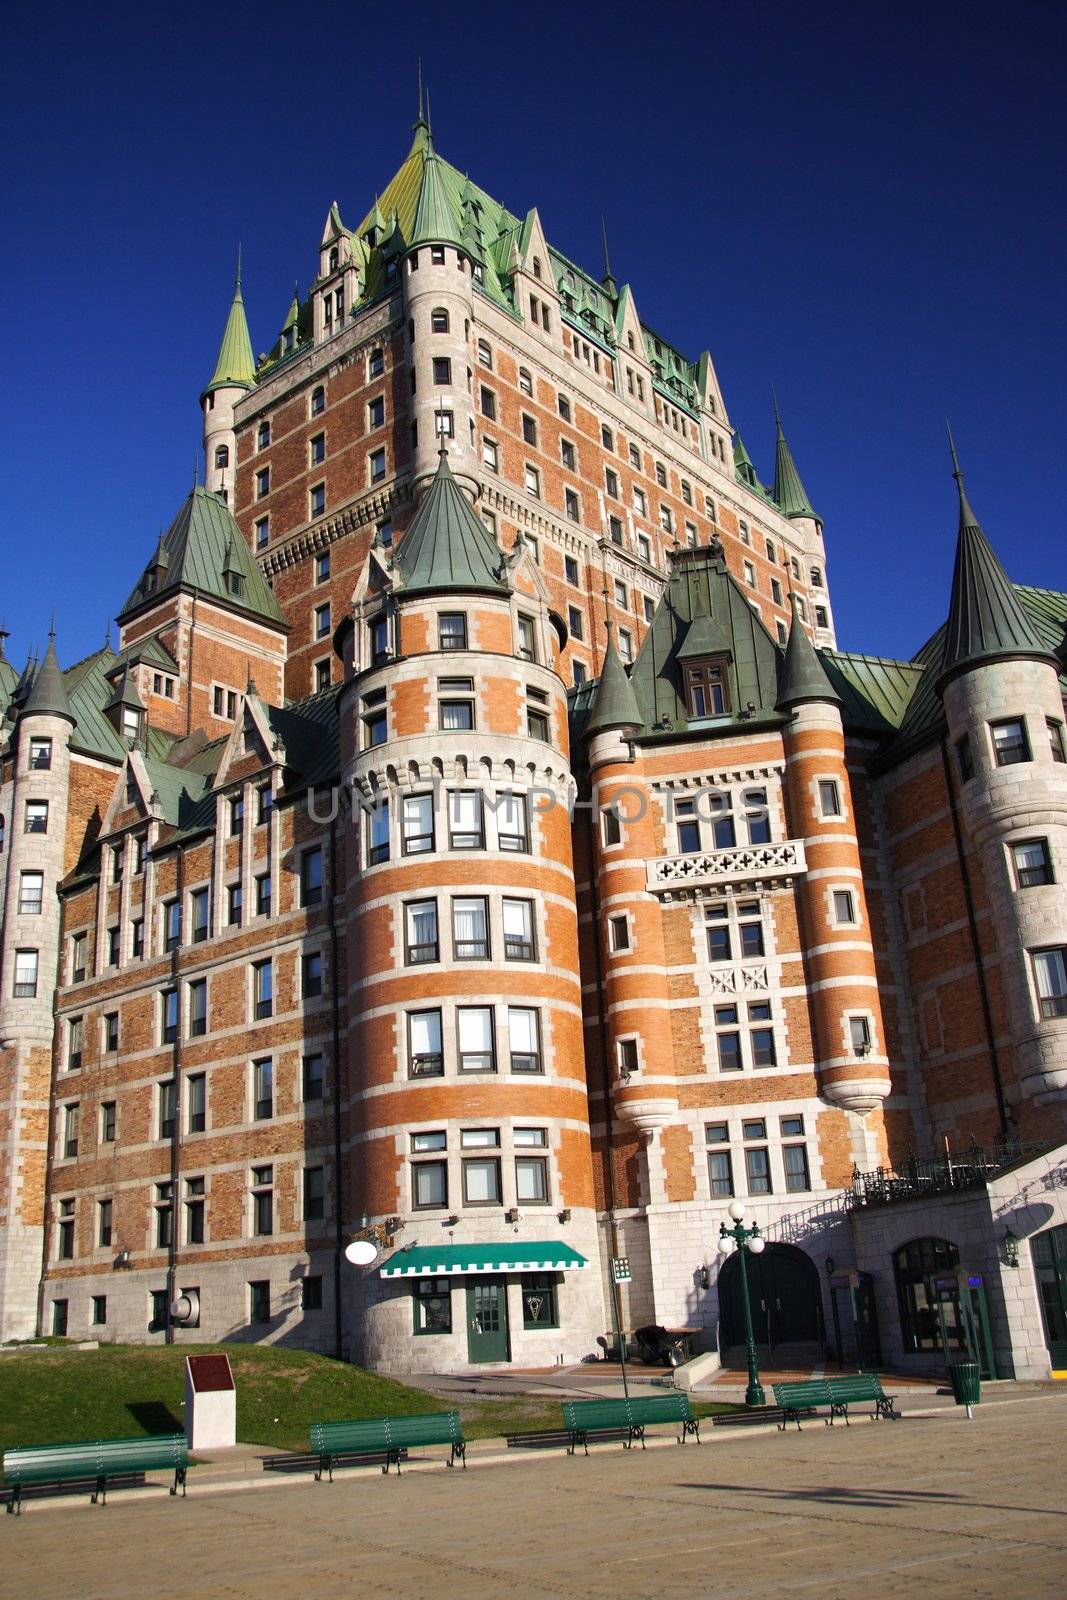 Frontenac chateau, Quebec City by Maridav